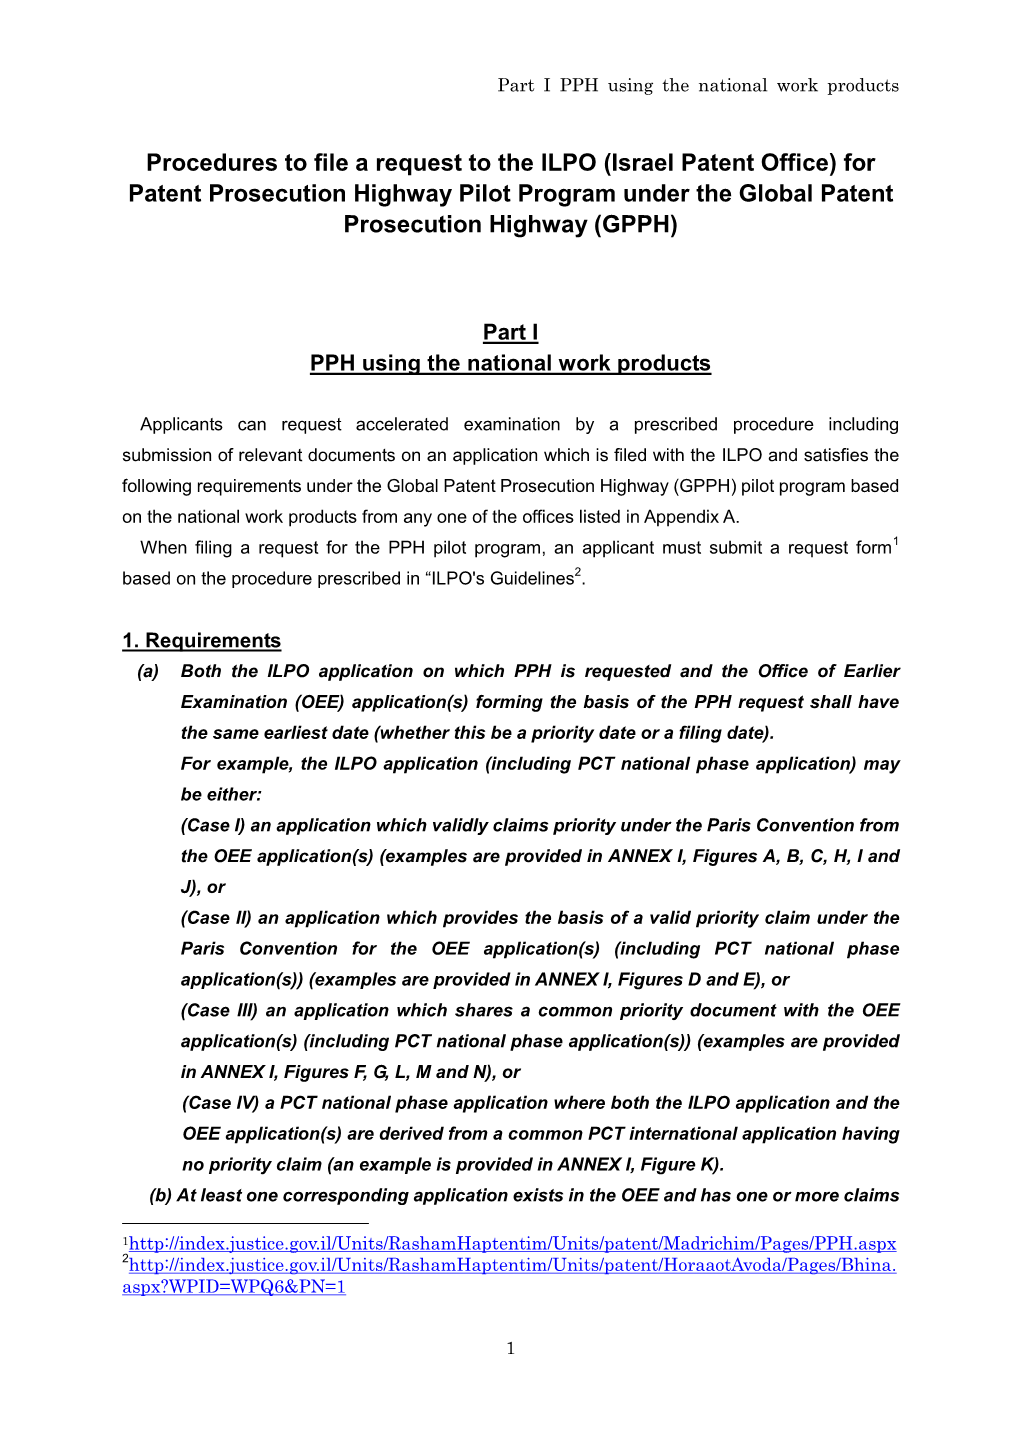 Procedures to File a Request to the ILPO (Israel Patent Office) for Patent Prosecution Highway Pilot Program Under the Global Patent Prosecution Highway (GPPH)